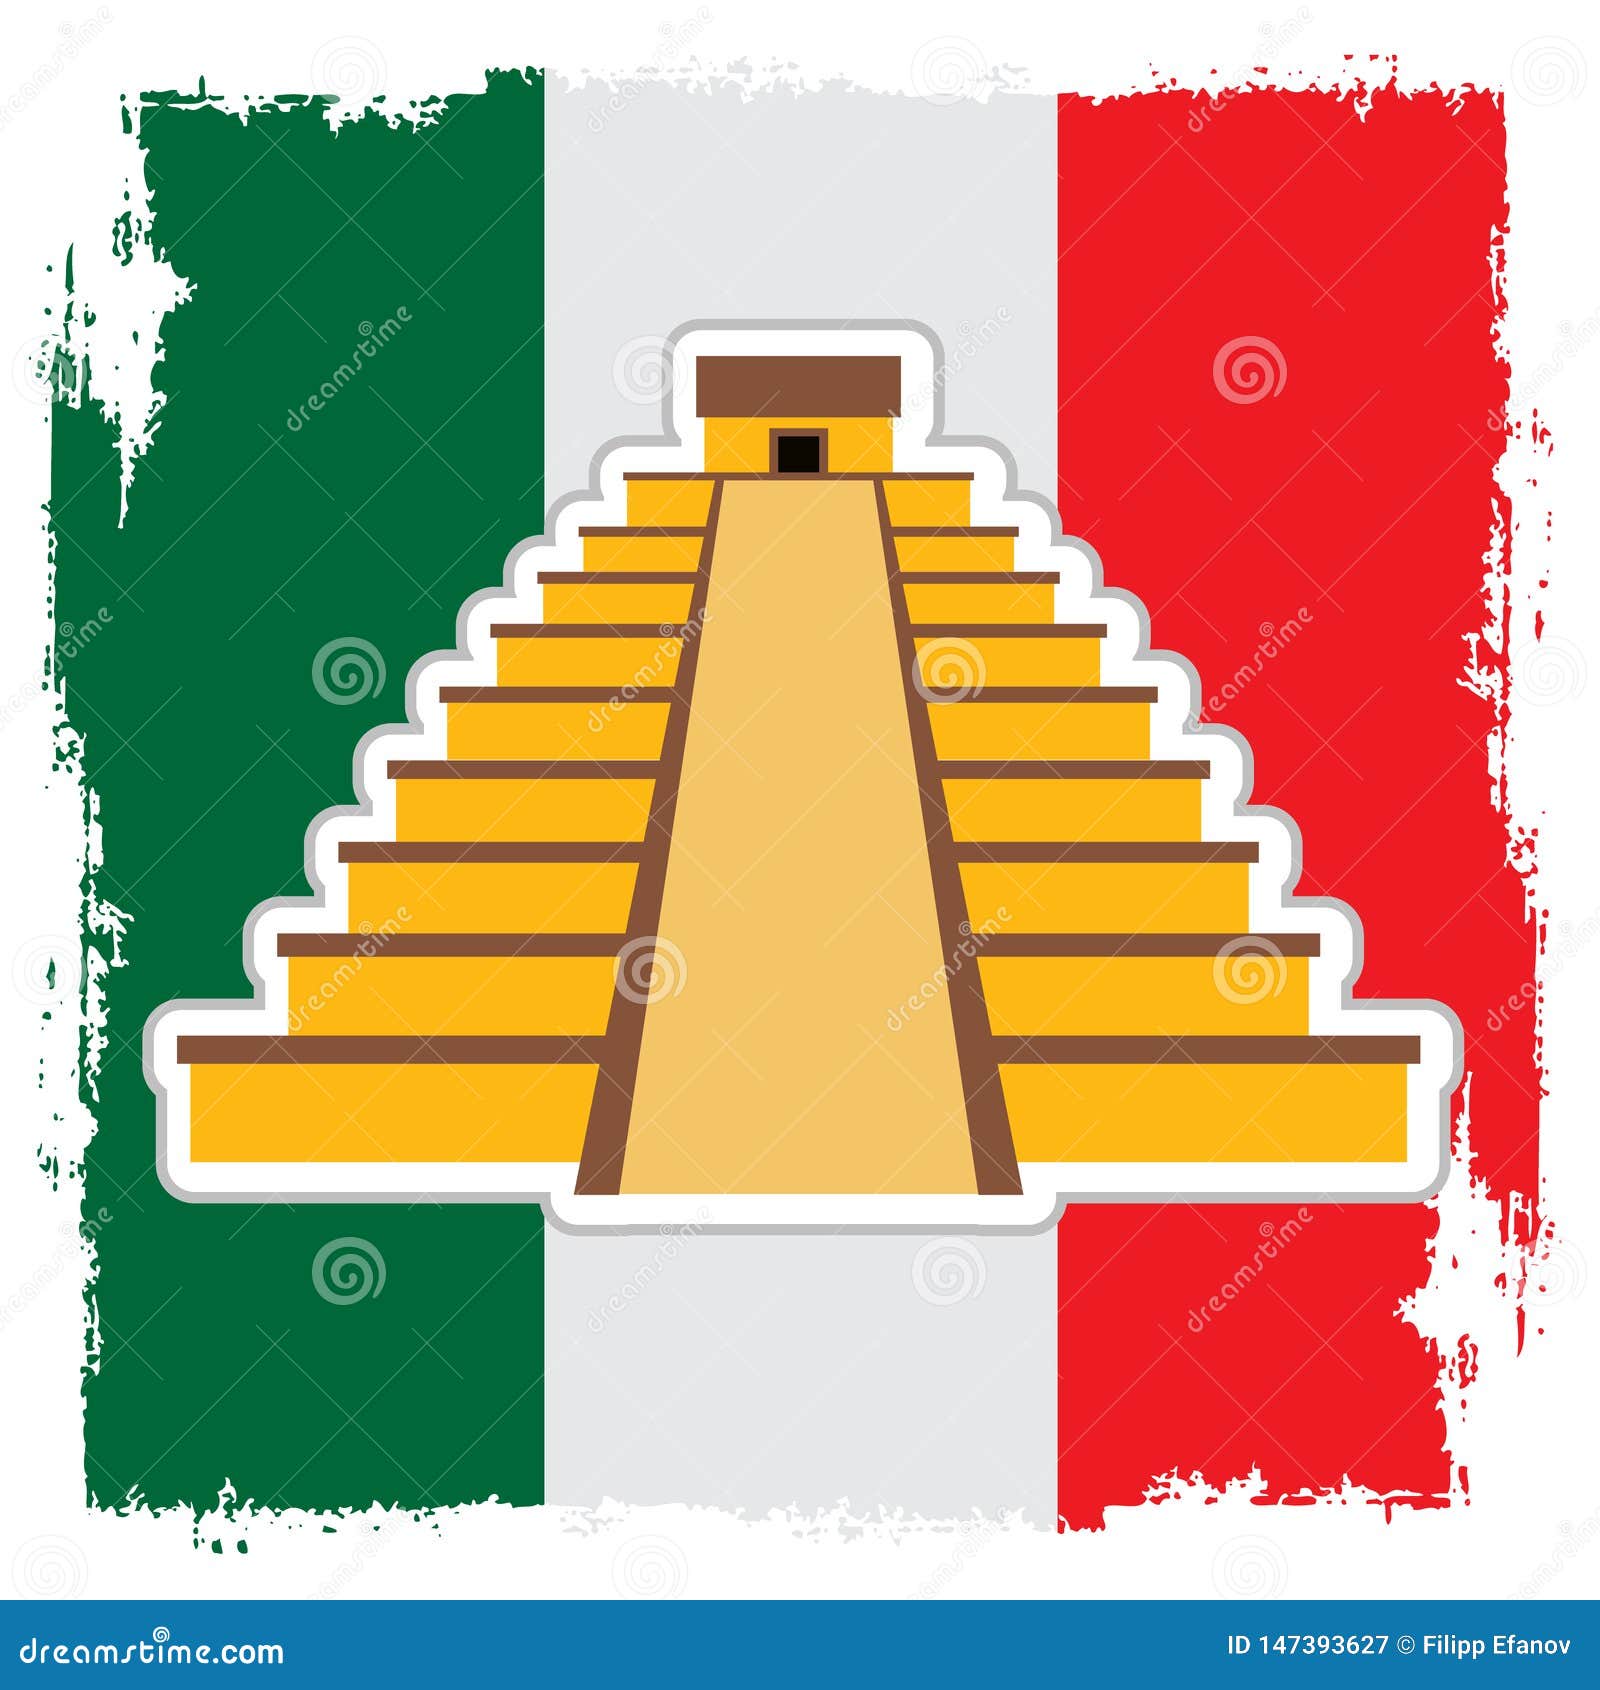 Teotihuacan on the Background of the Mexican Flag. Pyramid of the Sun and  Pyramid of the Moon. Mexican Sights Logo Stock Illustration - Illustration  of stickers, souvenir: 147393627